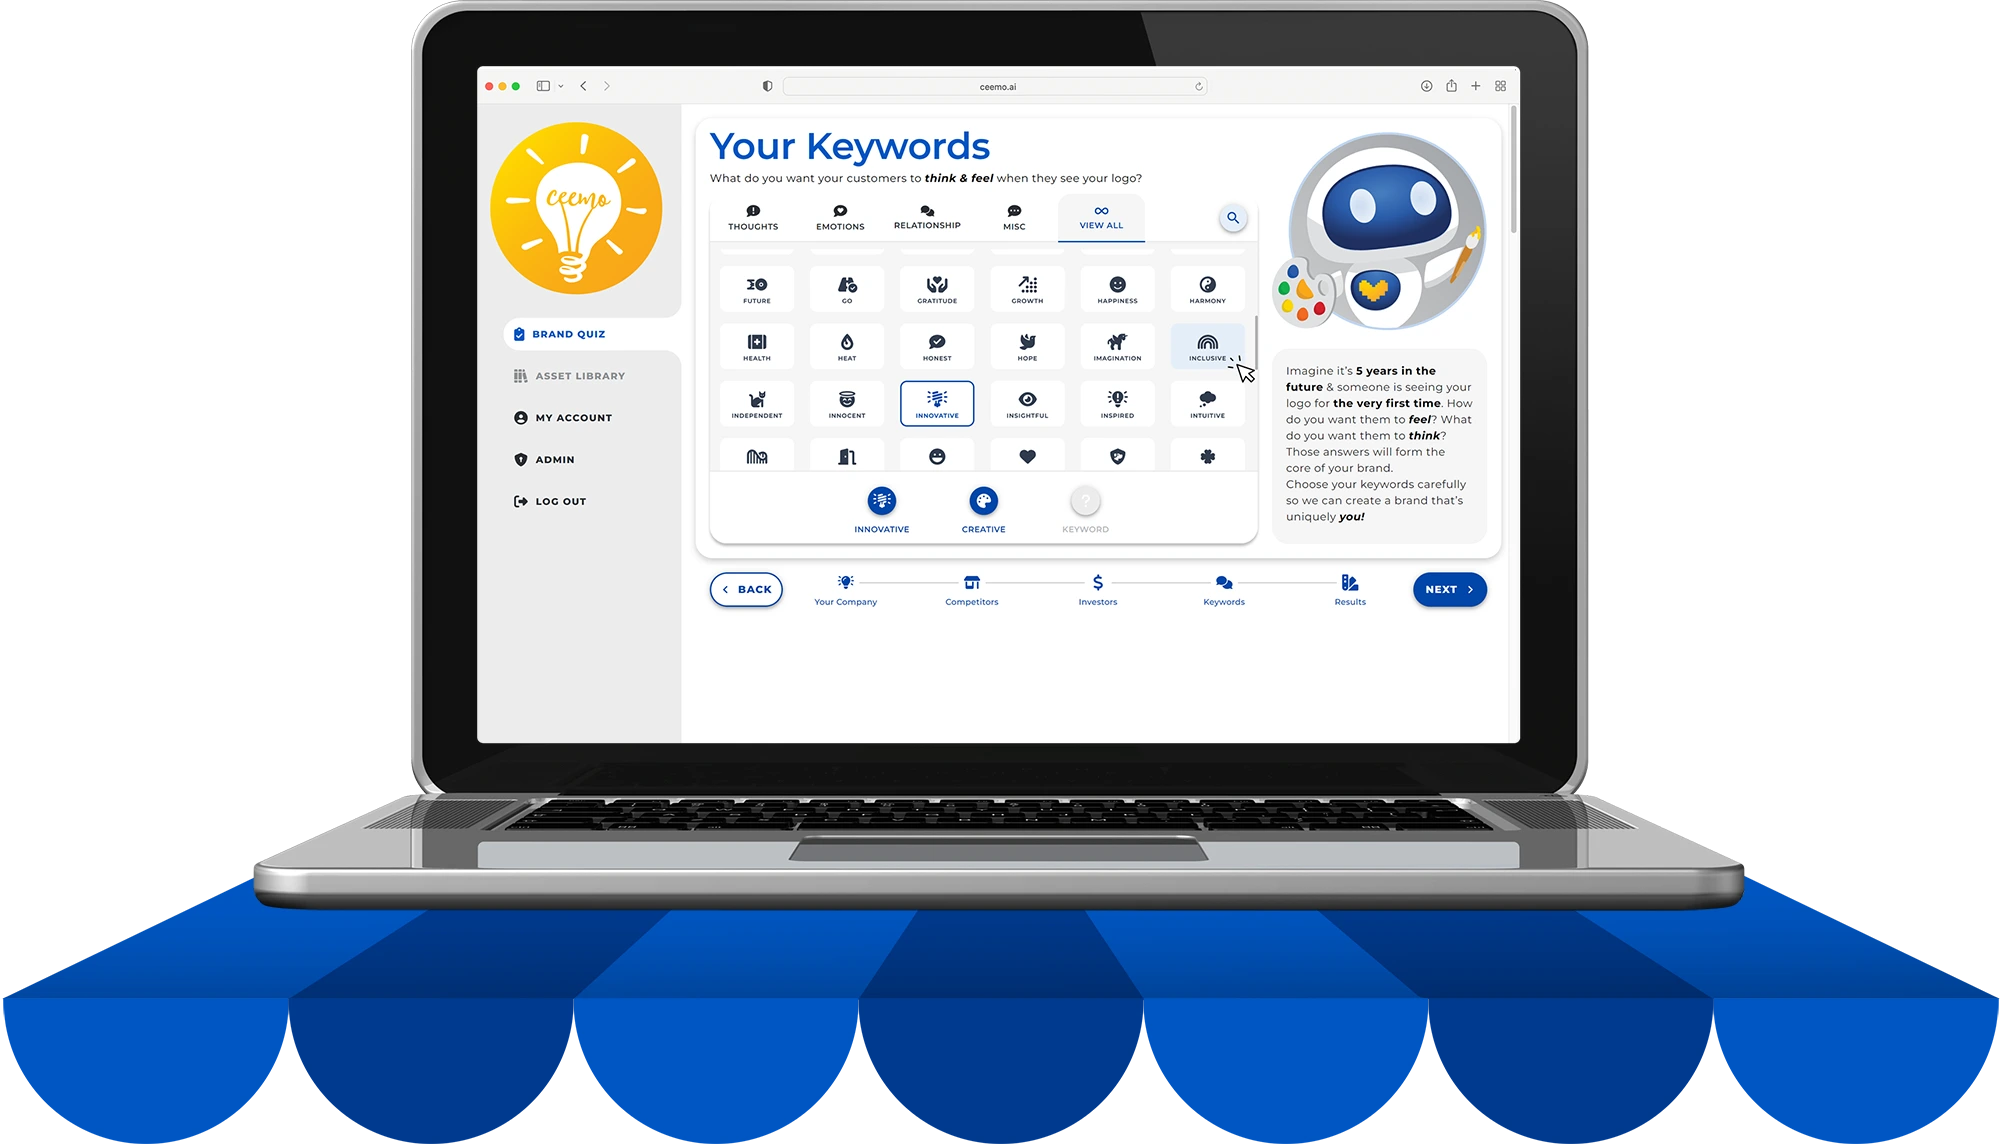 A screenshot of the Ceemo Brand Quiz, presented on a graphic of a laptop placed on a rainbow-colored platform. This screen shows how you can choose 3 keywords to define how you want your brand to be perceived by your customers.